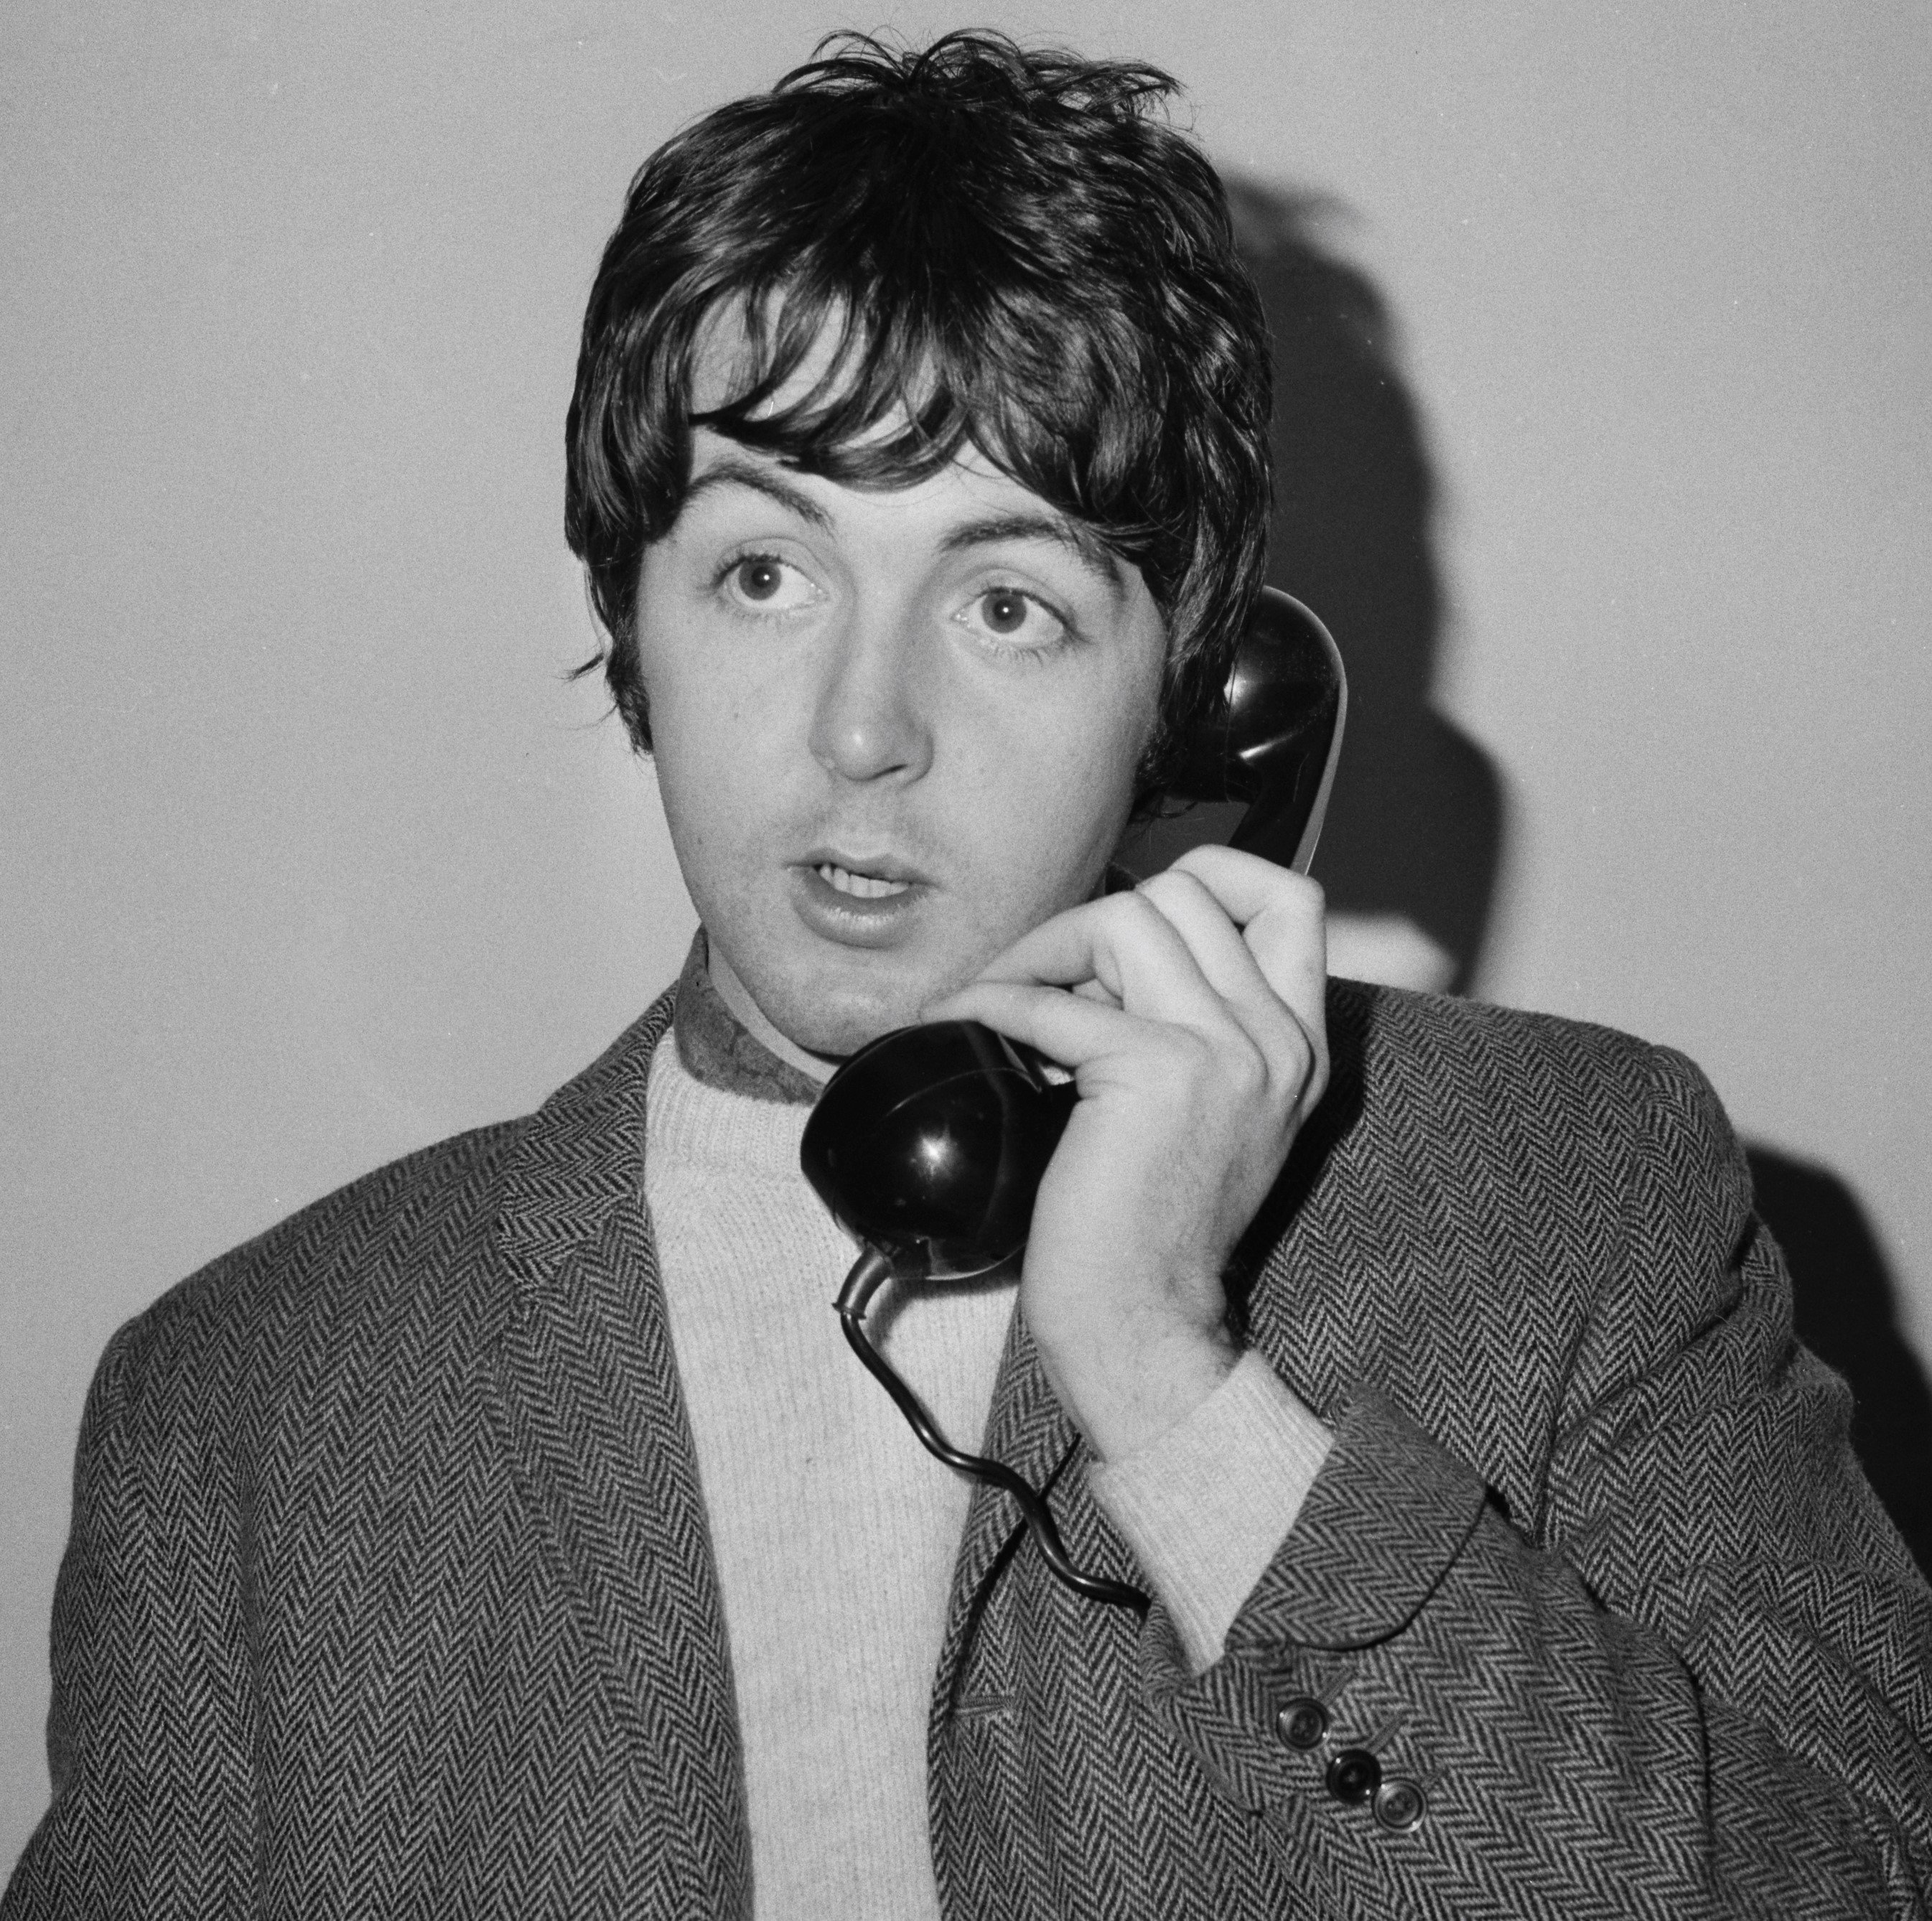 Paul McCartney with a phone during The Beatles' "Yesterday" era